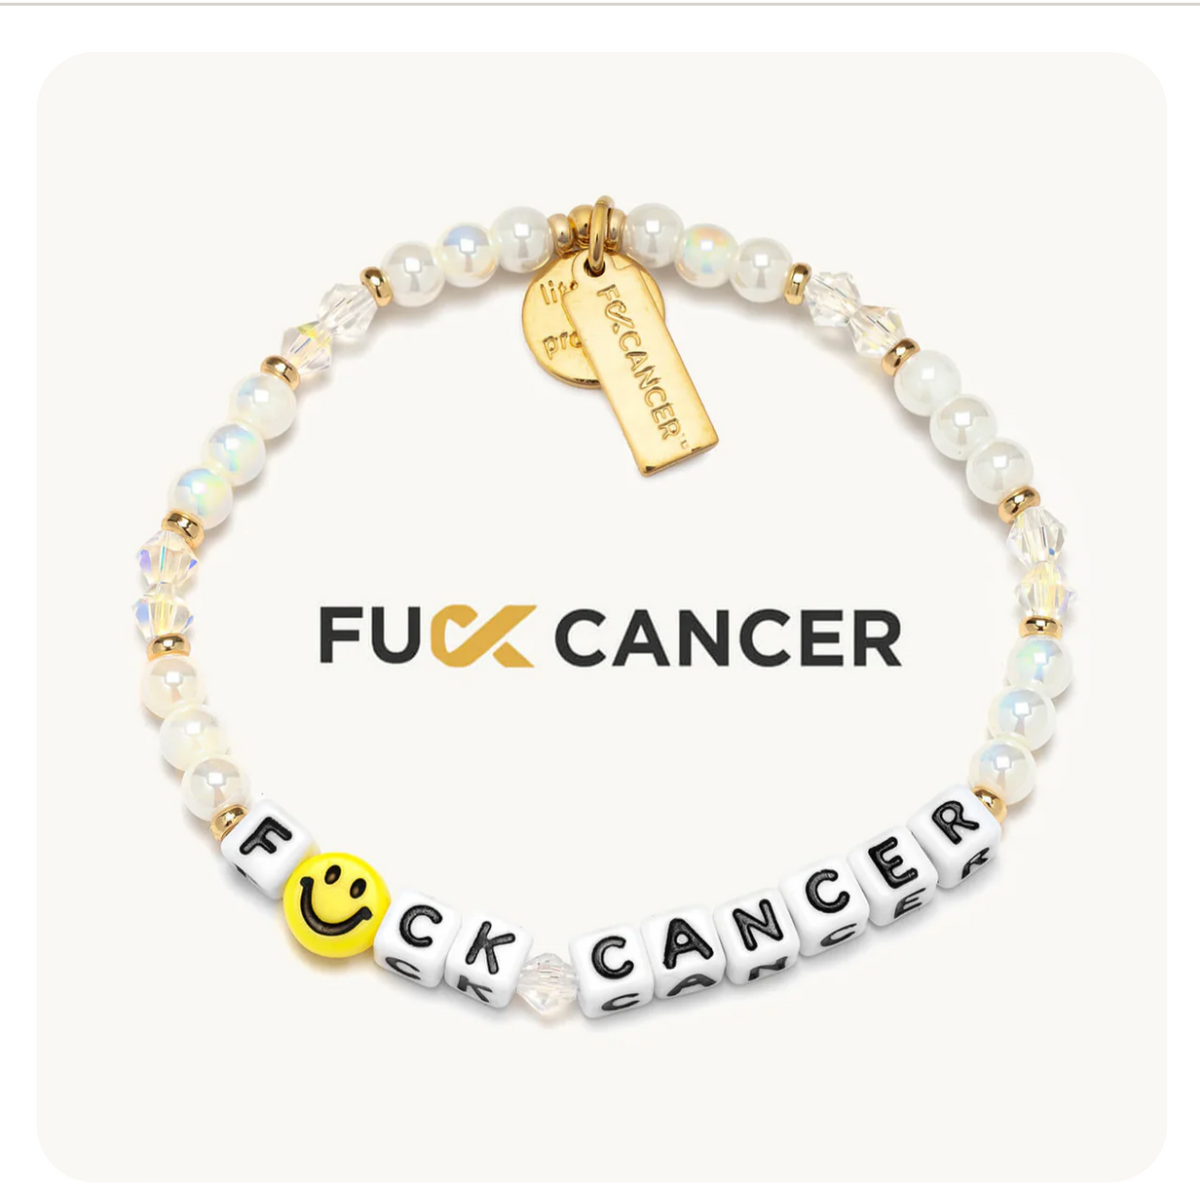 Little Words Project - Fu*k Cancer